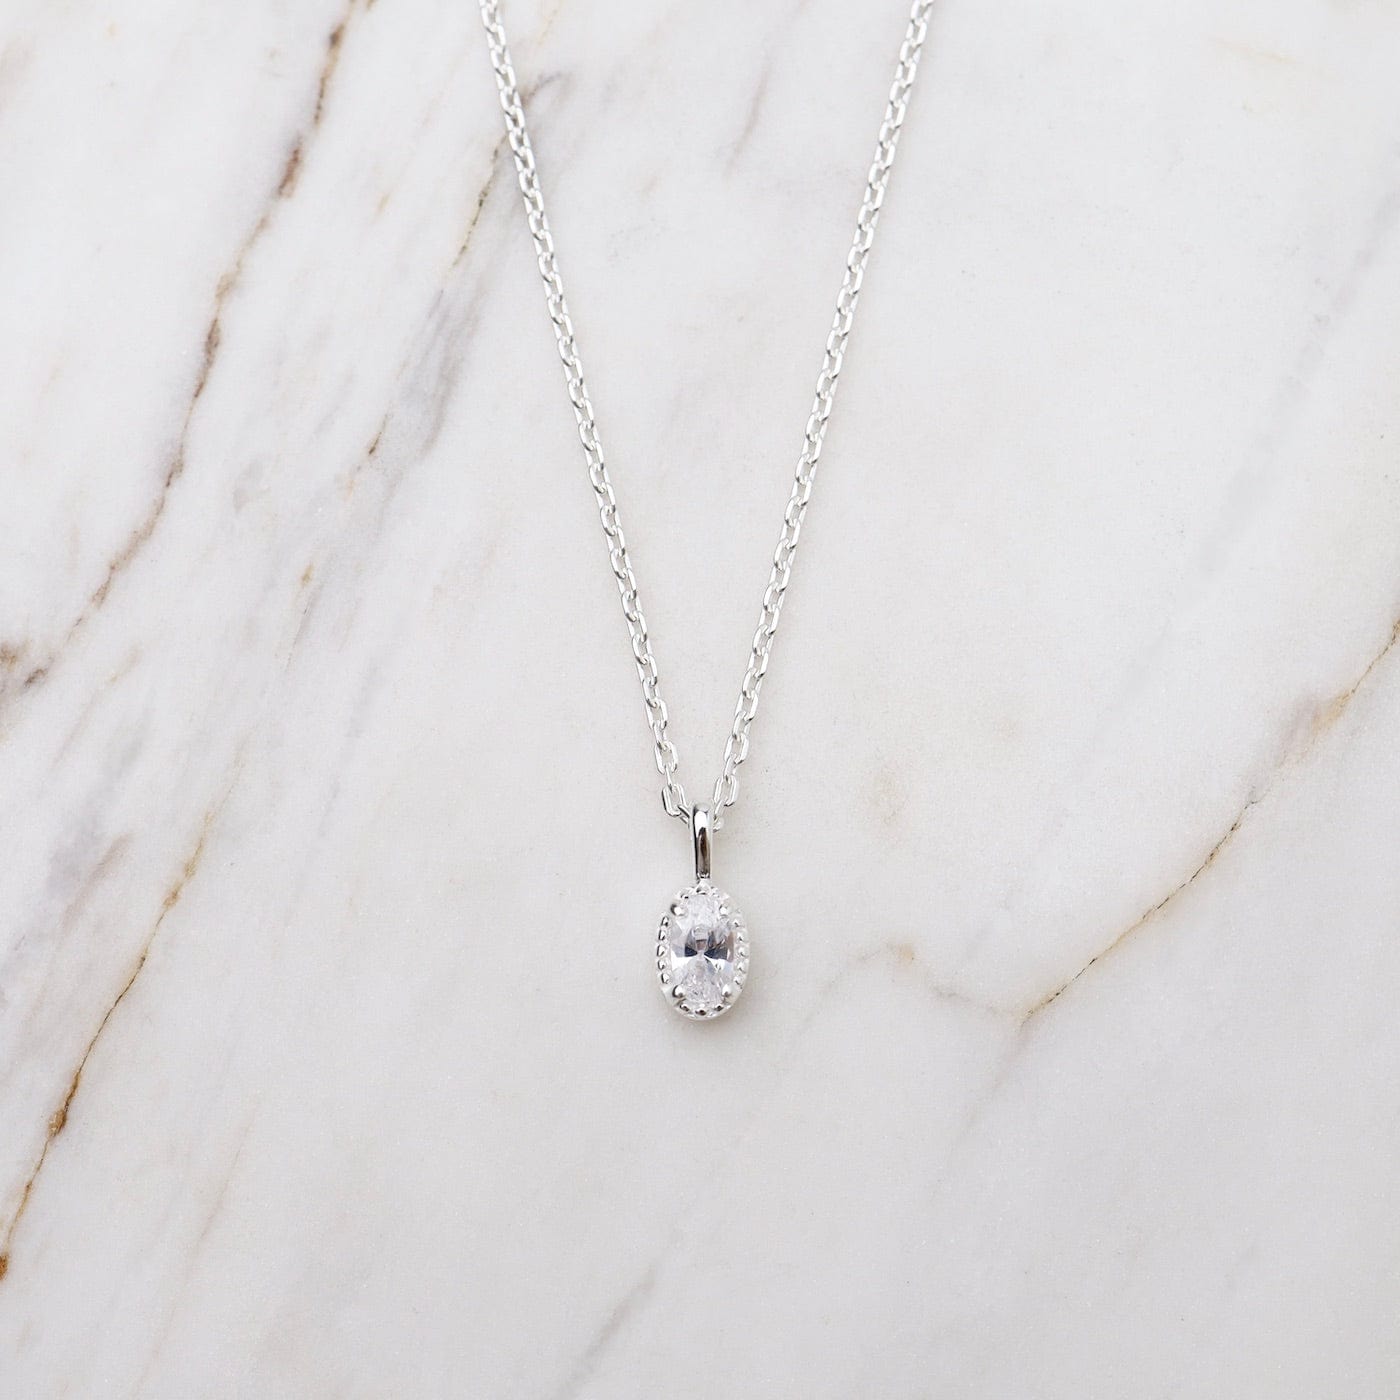 NKL Oval CZ with Milgrain Edge Necklace - Sterling Silver